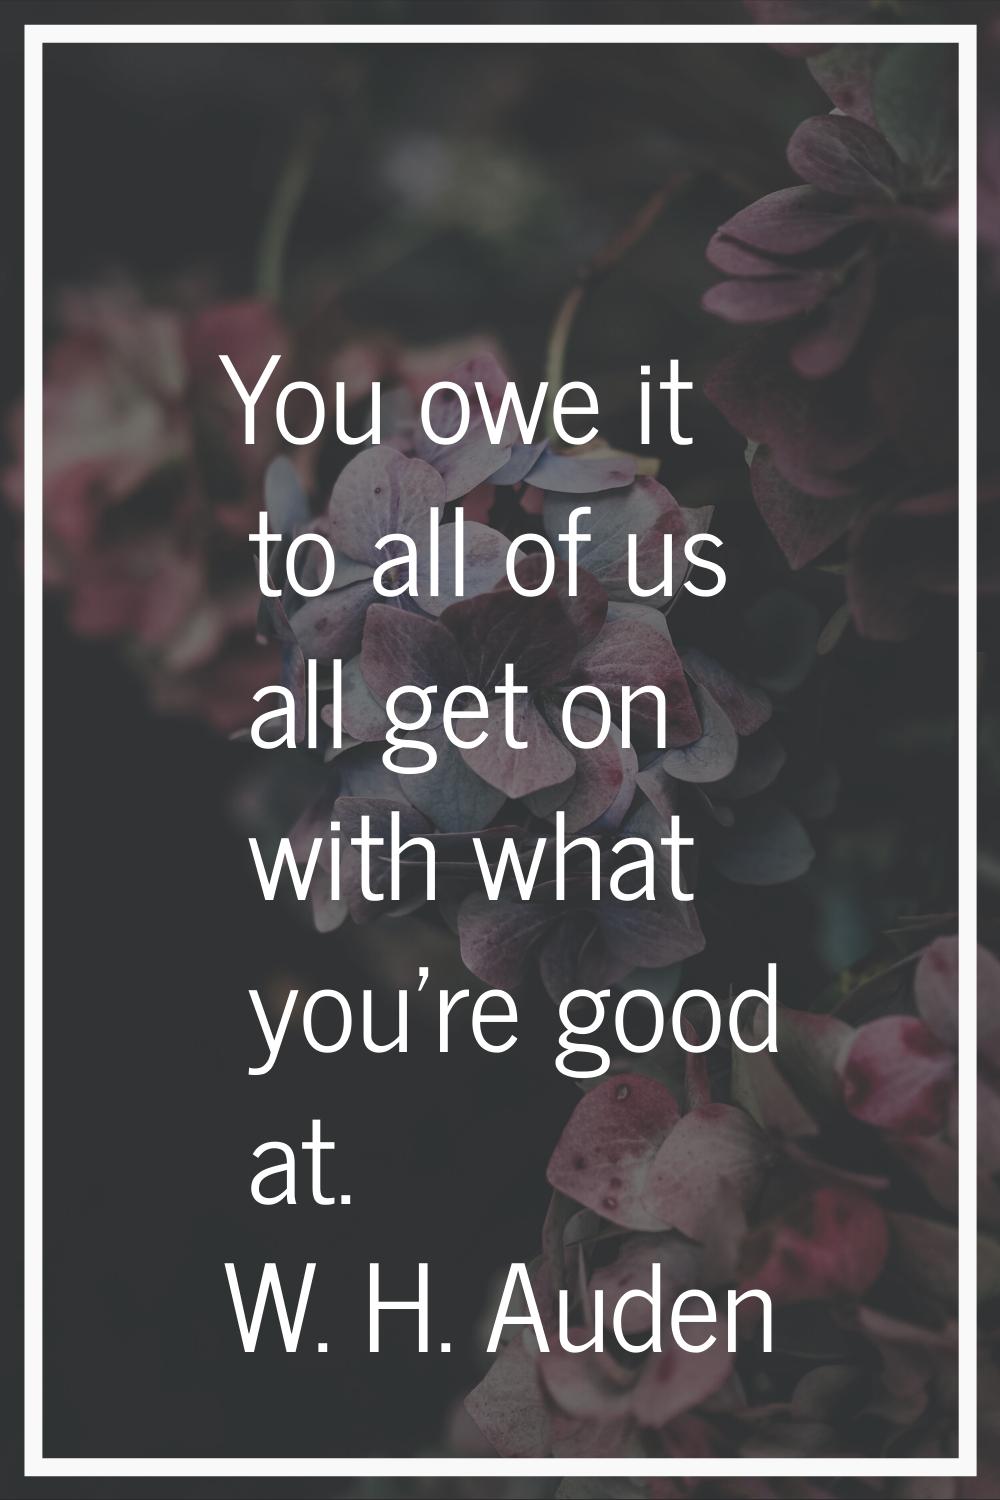 You owe it to all of us all get on with what you're good at.